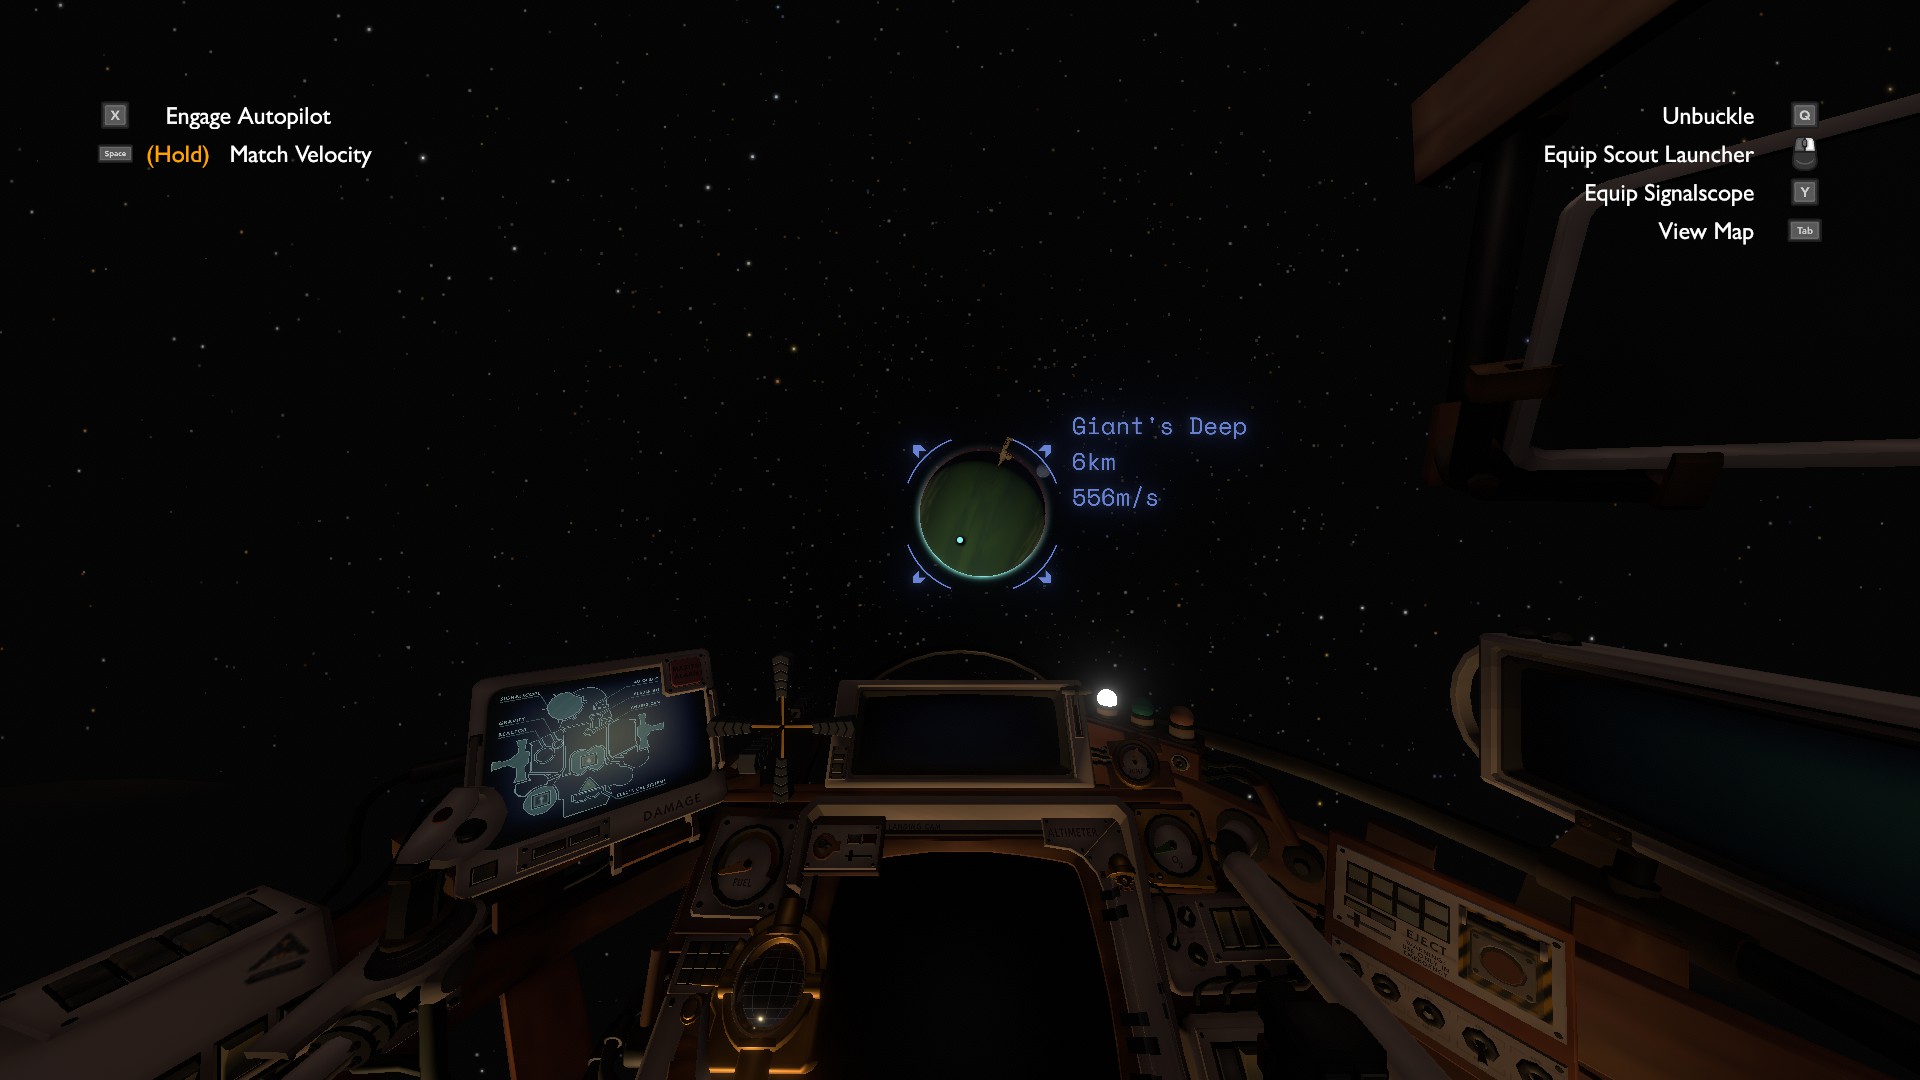 outer wilds achievements